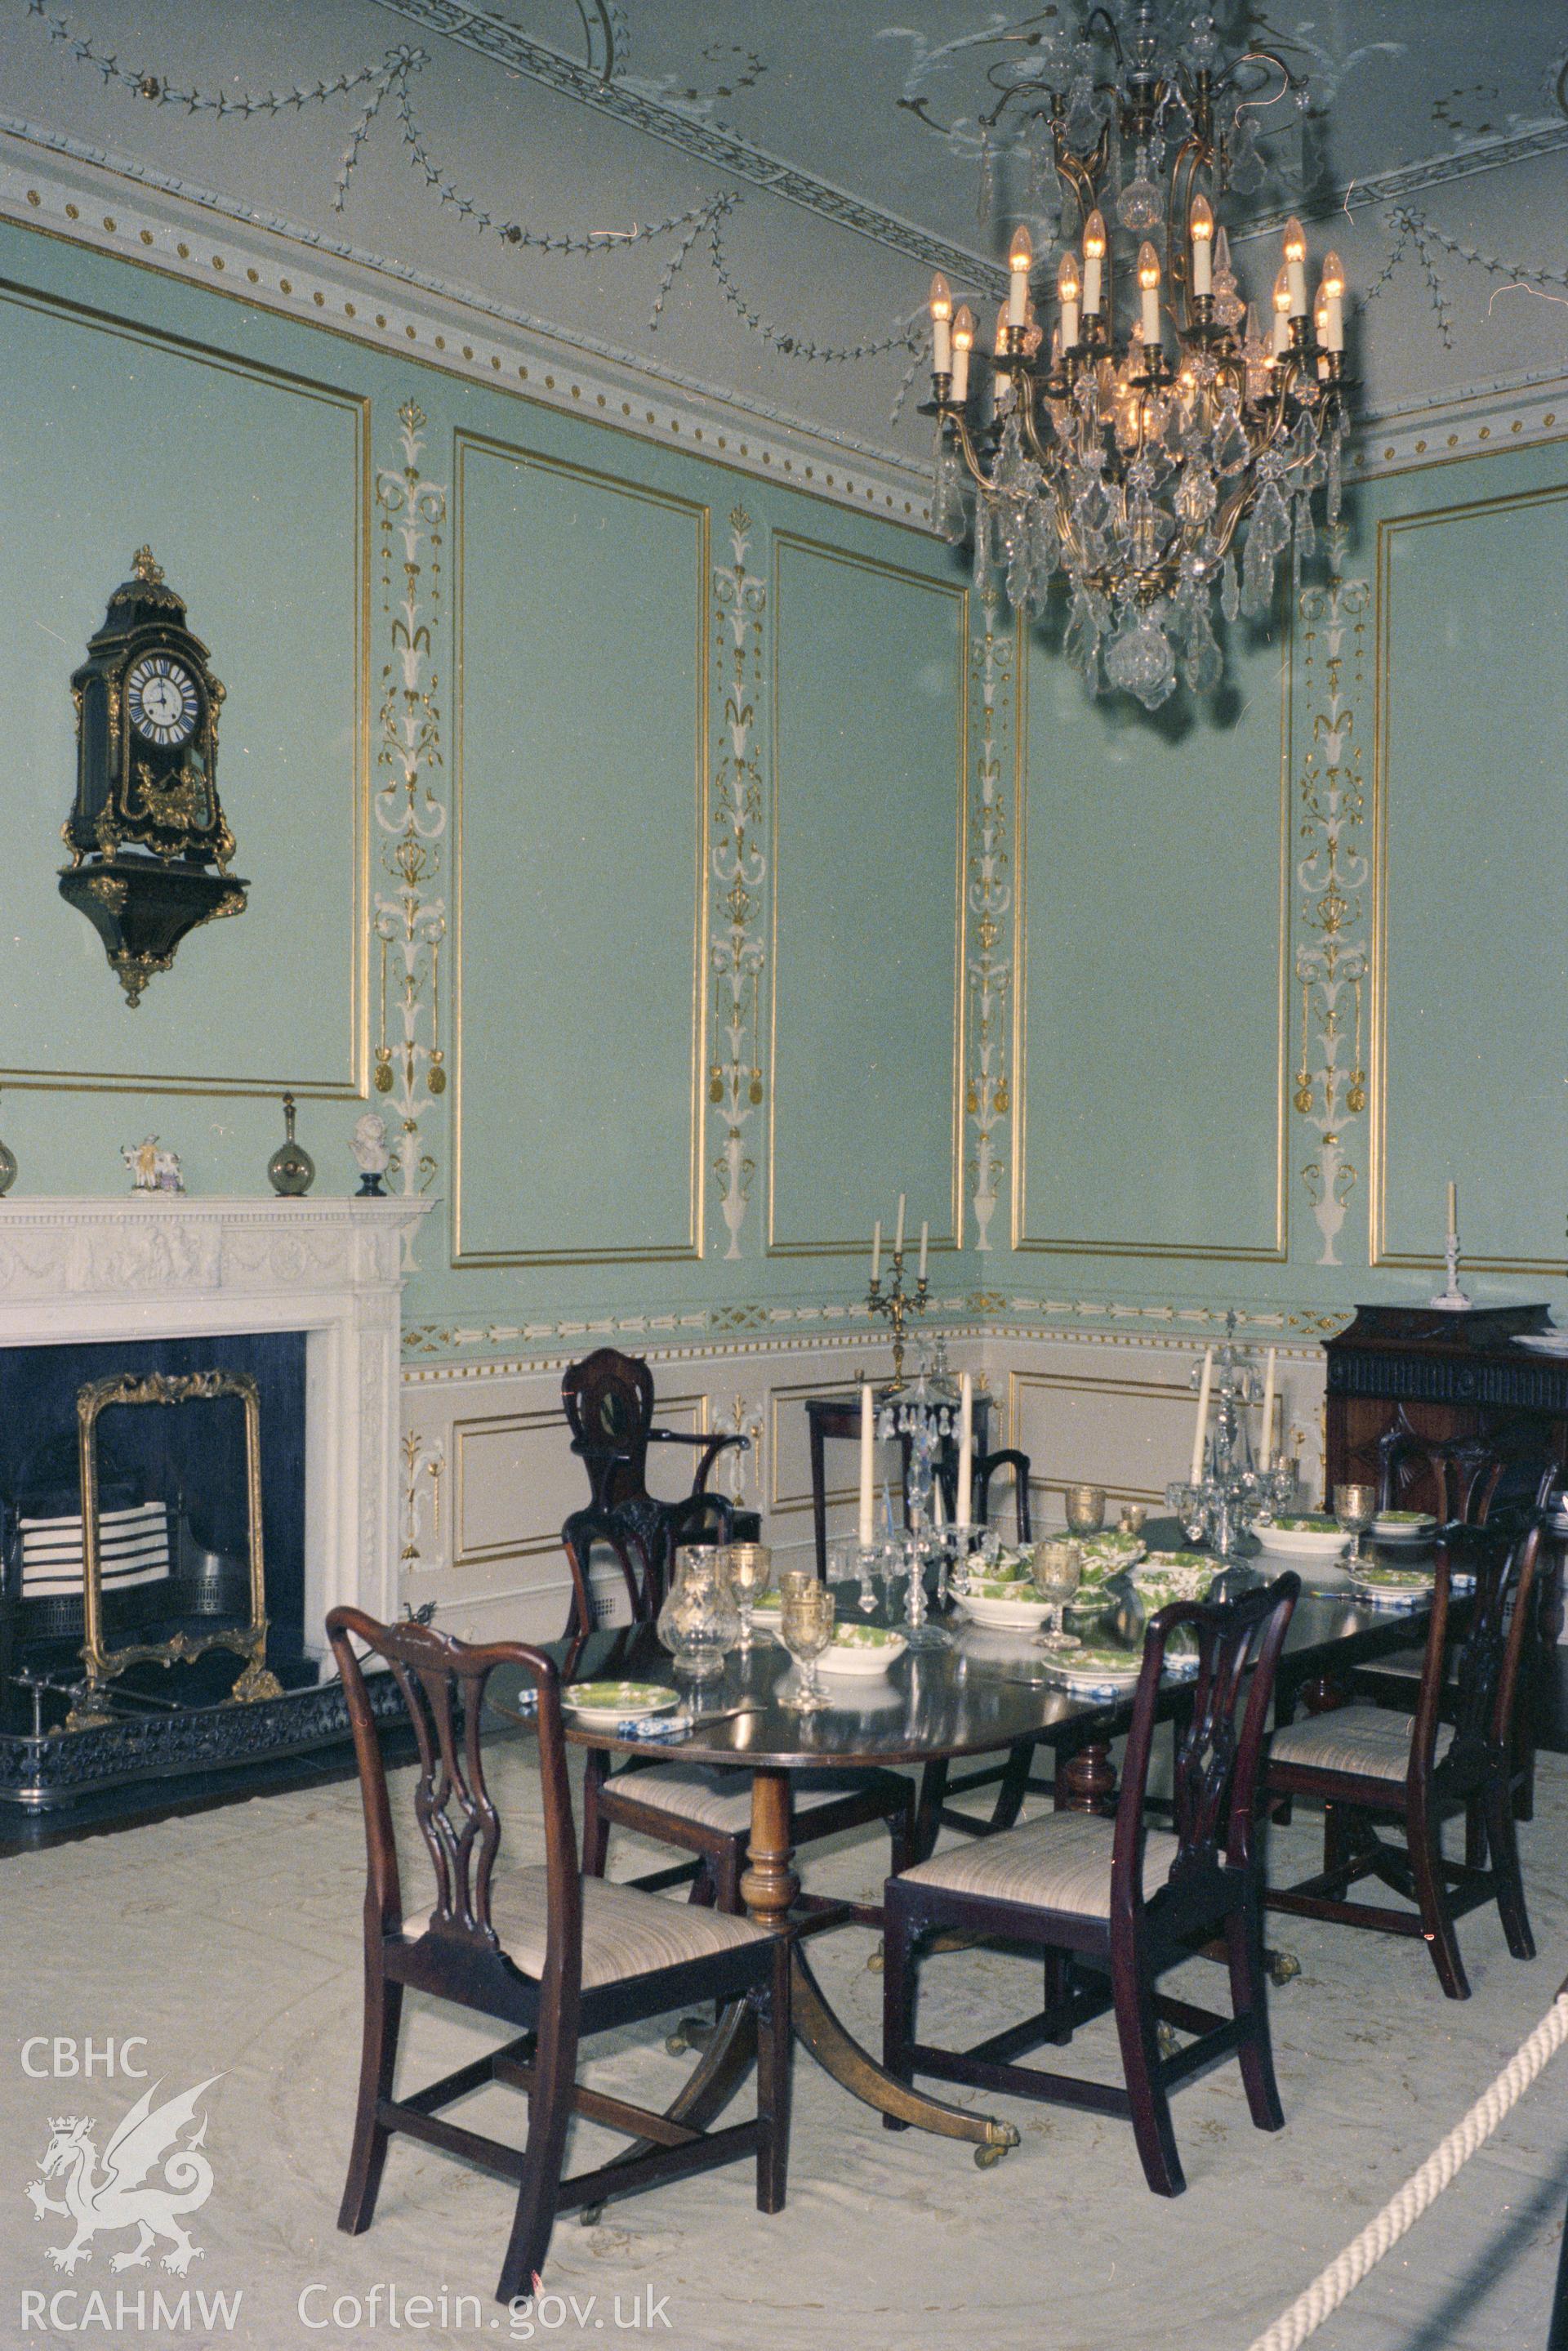 Interior view (dining room) of Chirk castle collated by the former Central Office of Information.